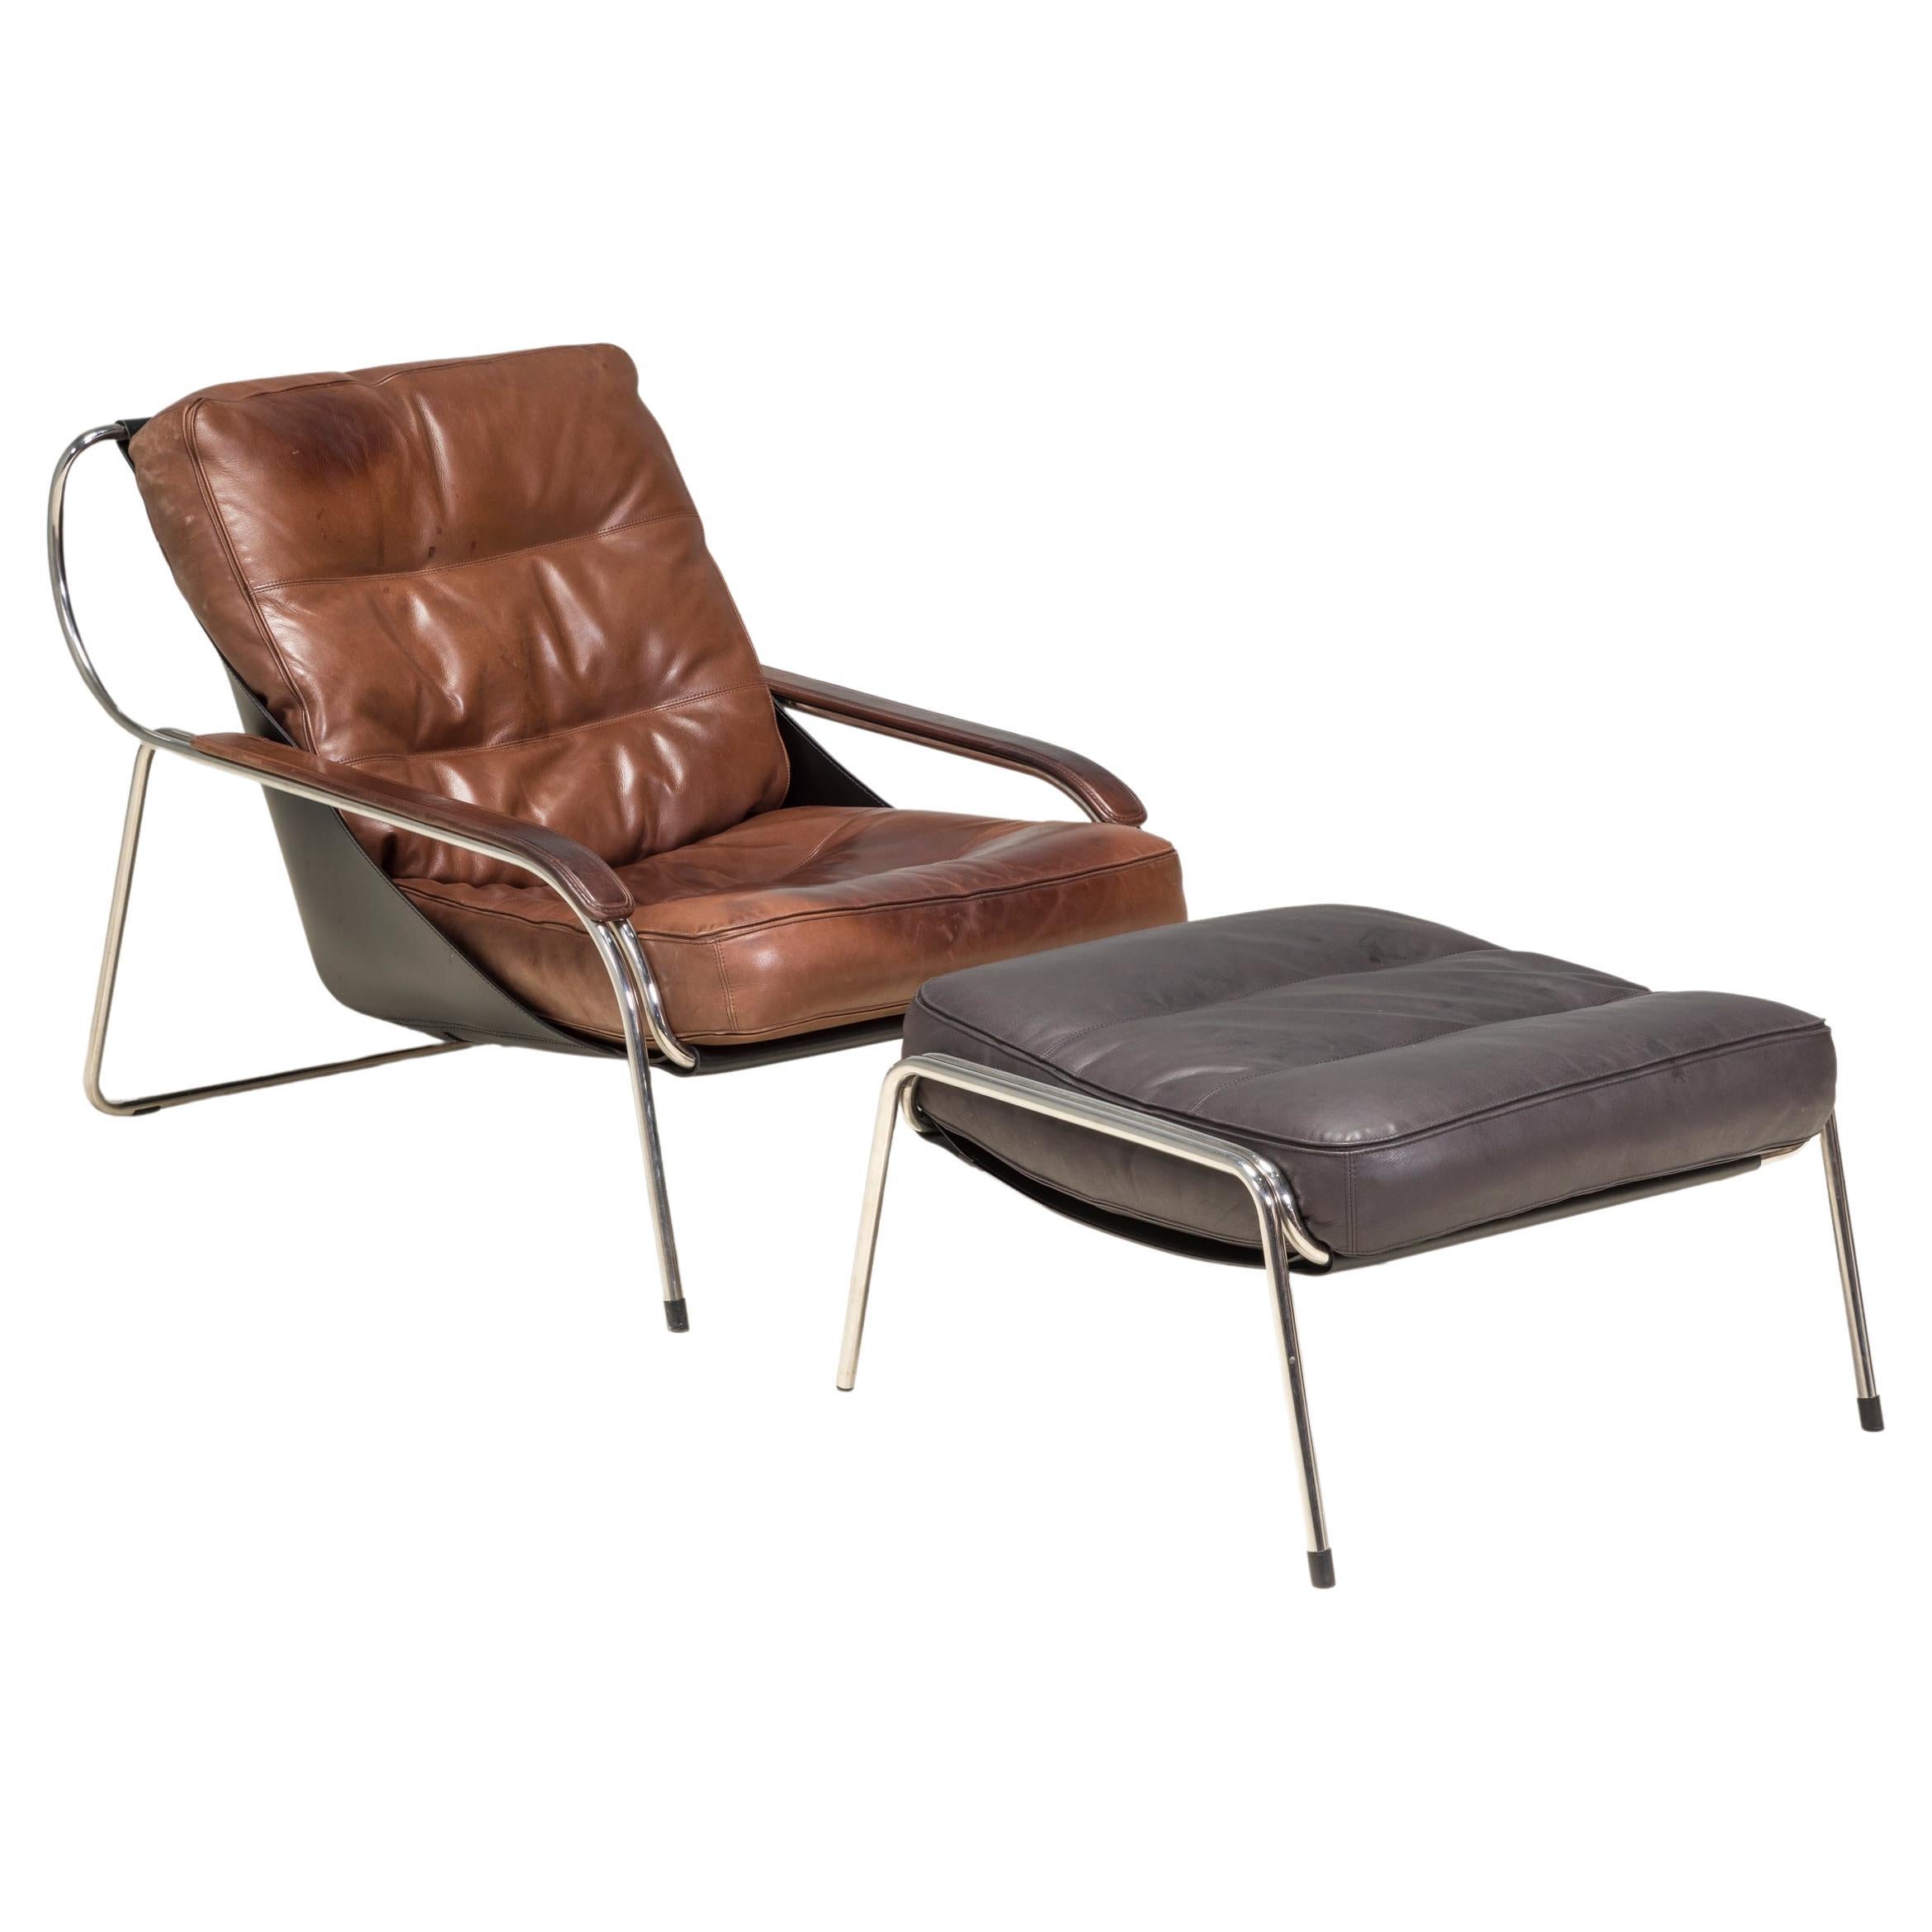 Marco Zanuso for Zanotta Brown Leather Maggiolina Lounge Chair & Footstool For Sale